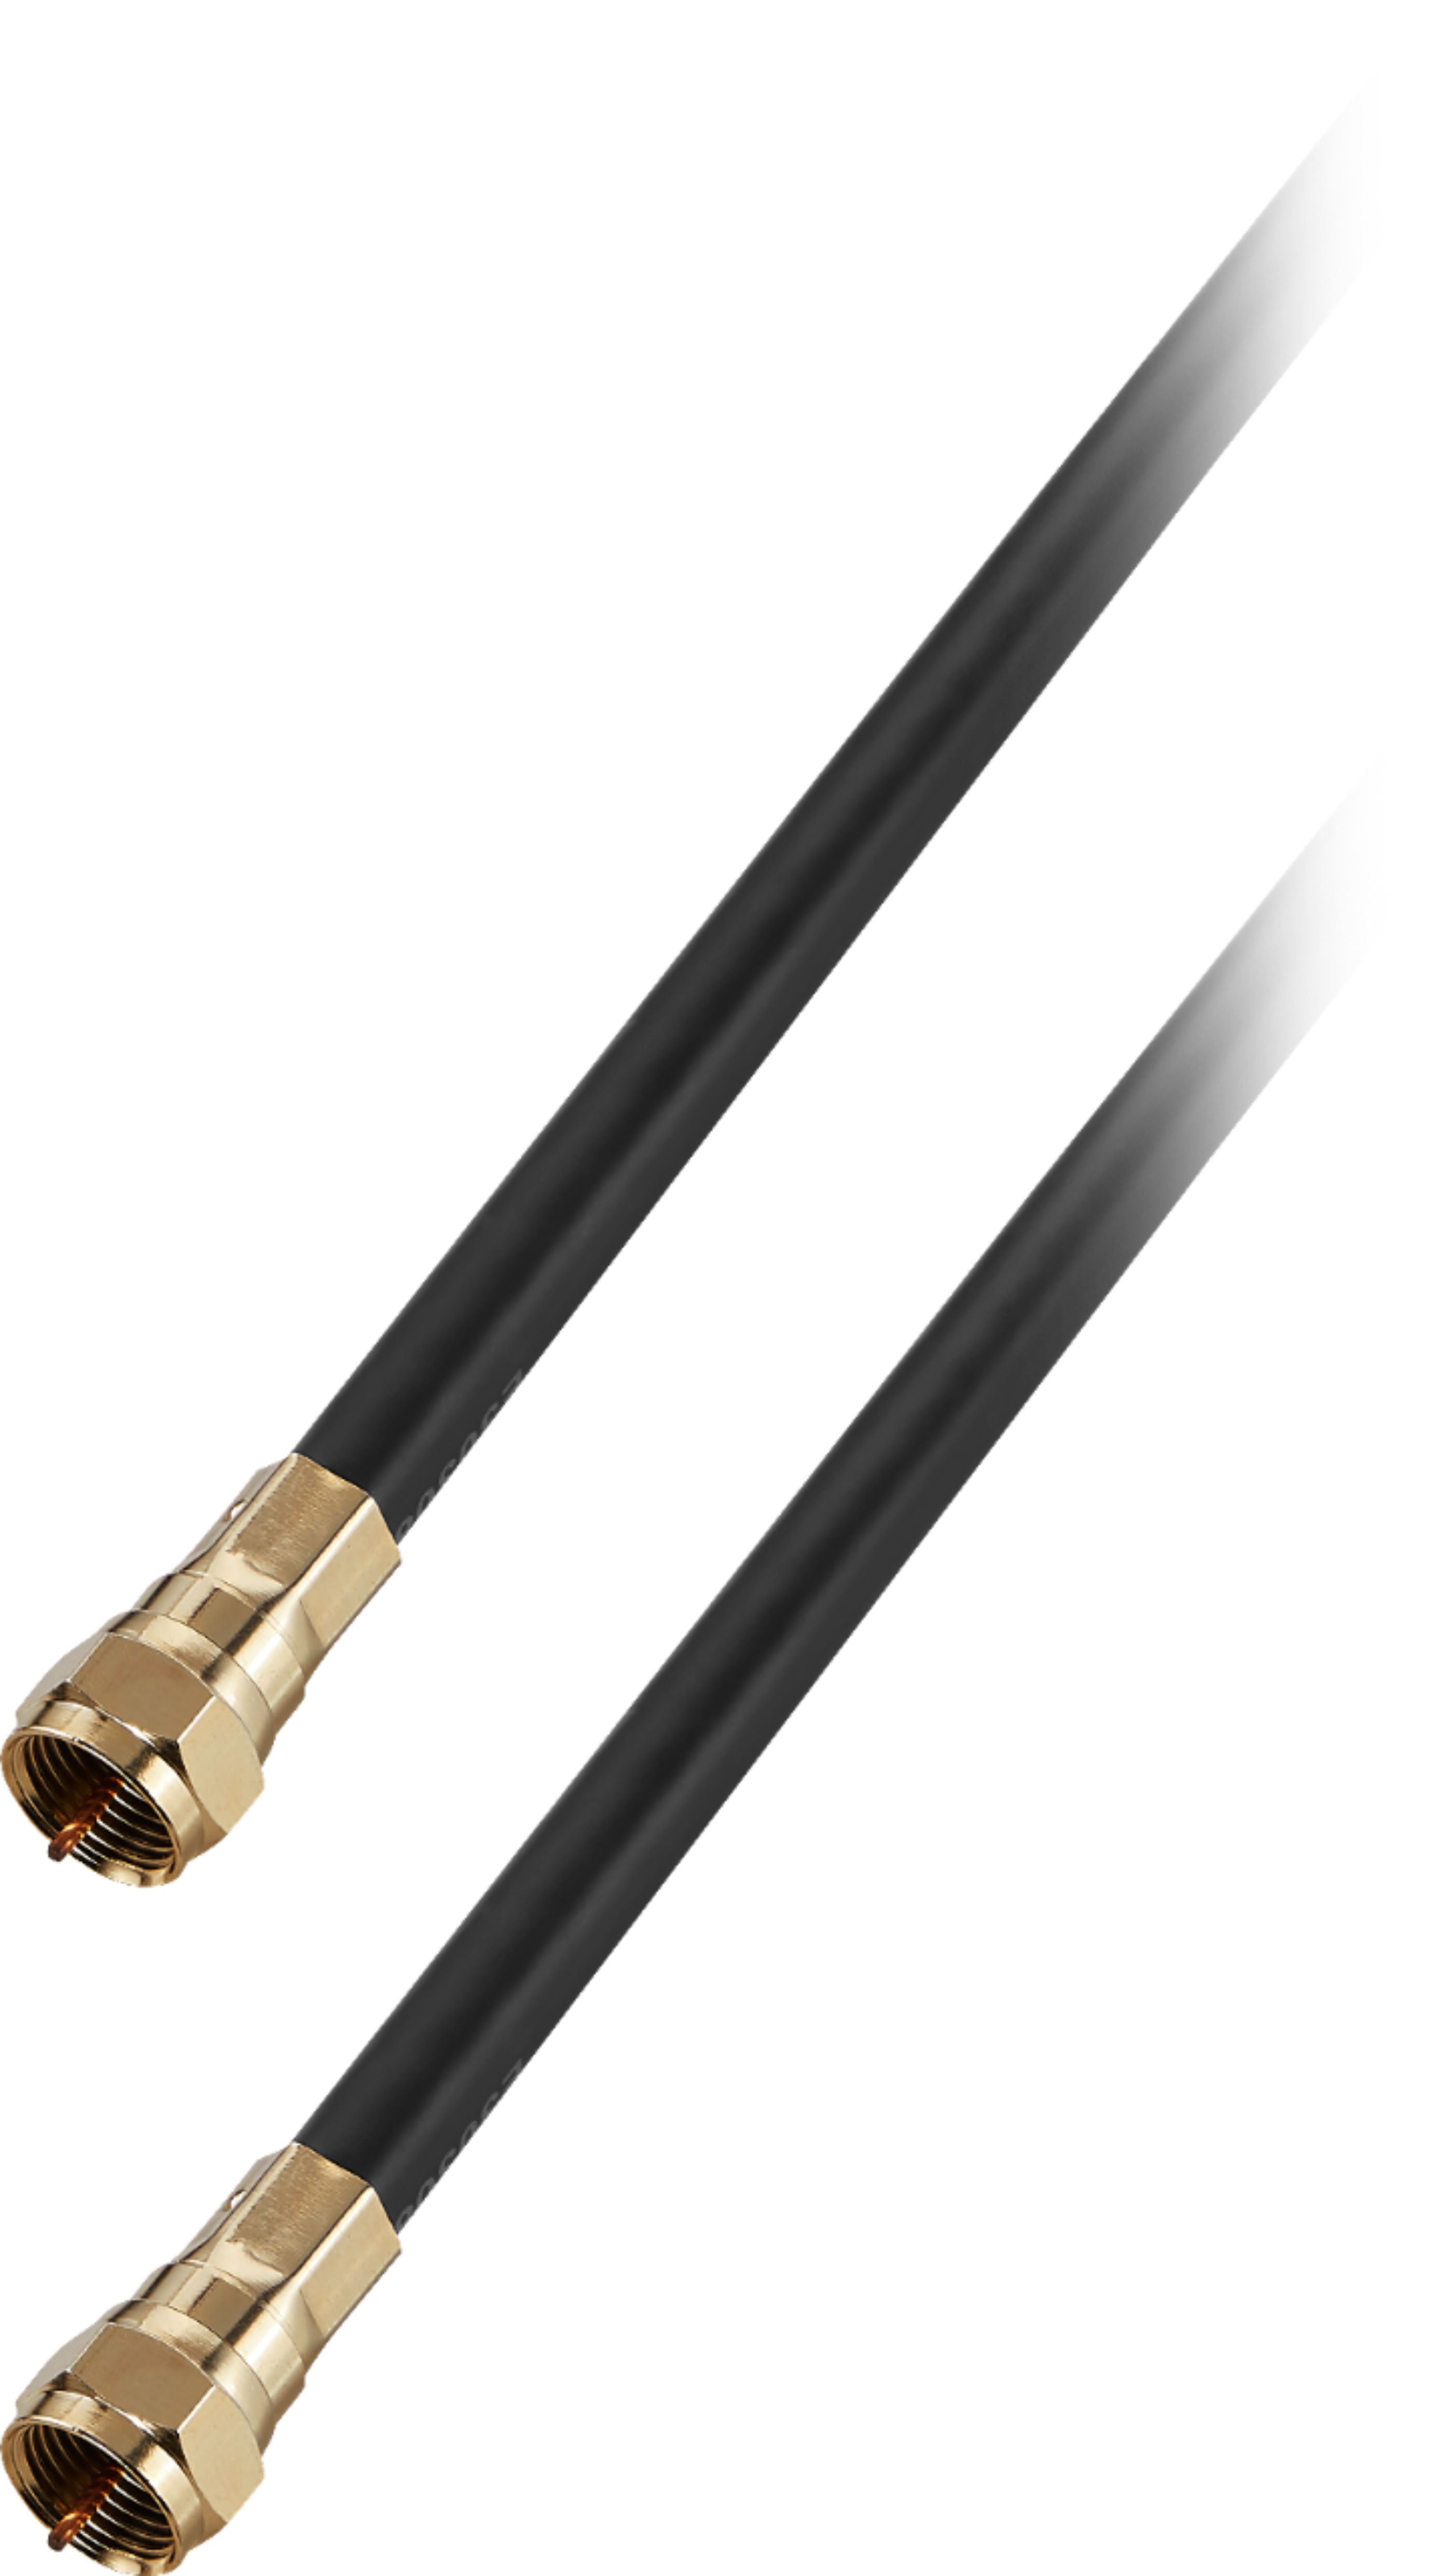 Angle View: Rocketfish™ - 50' Indoor/Outdoor RG6 Coaxial Cable - Black